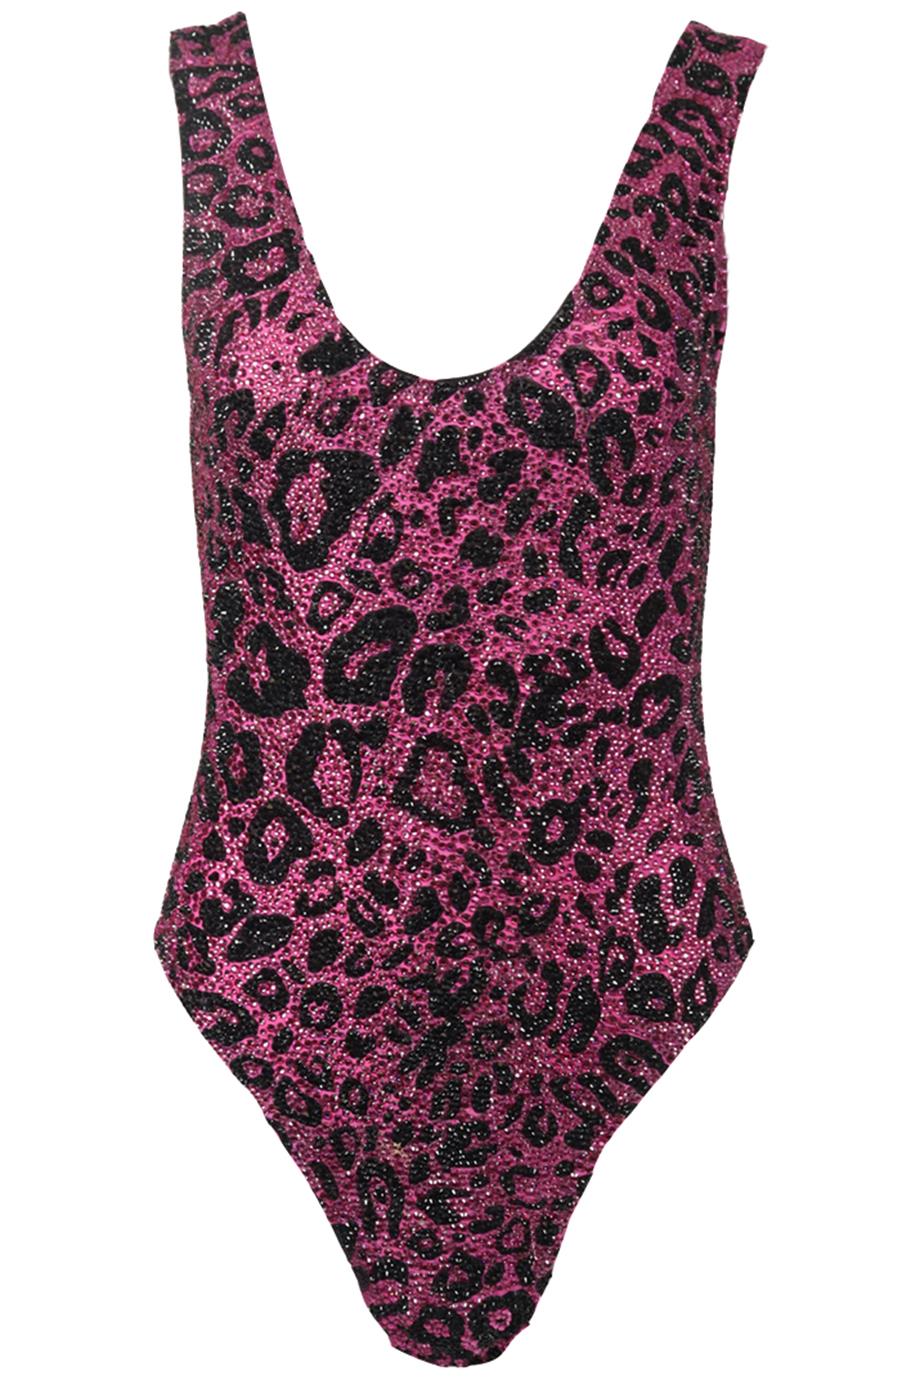 BRYAN HEARNS EMBELLISHED STRETCH JERSEY BODYSUIT SMALL